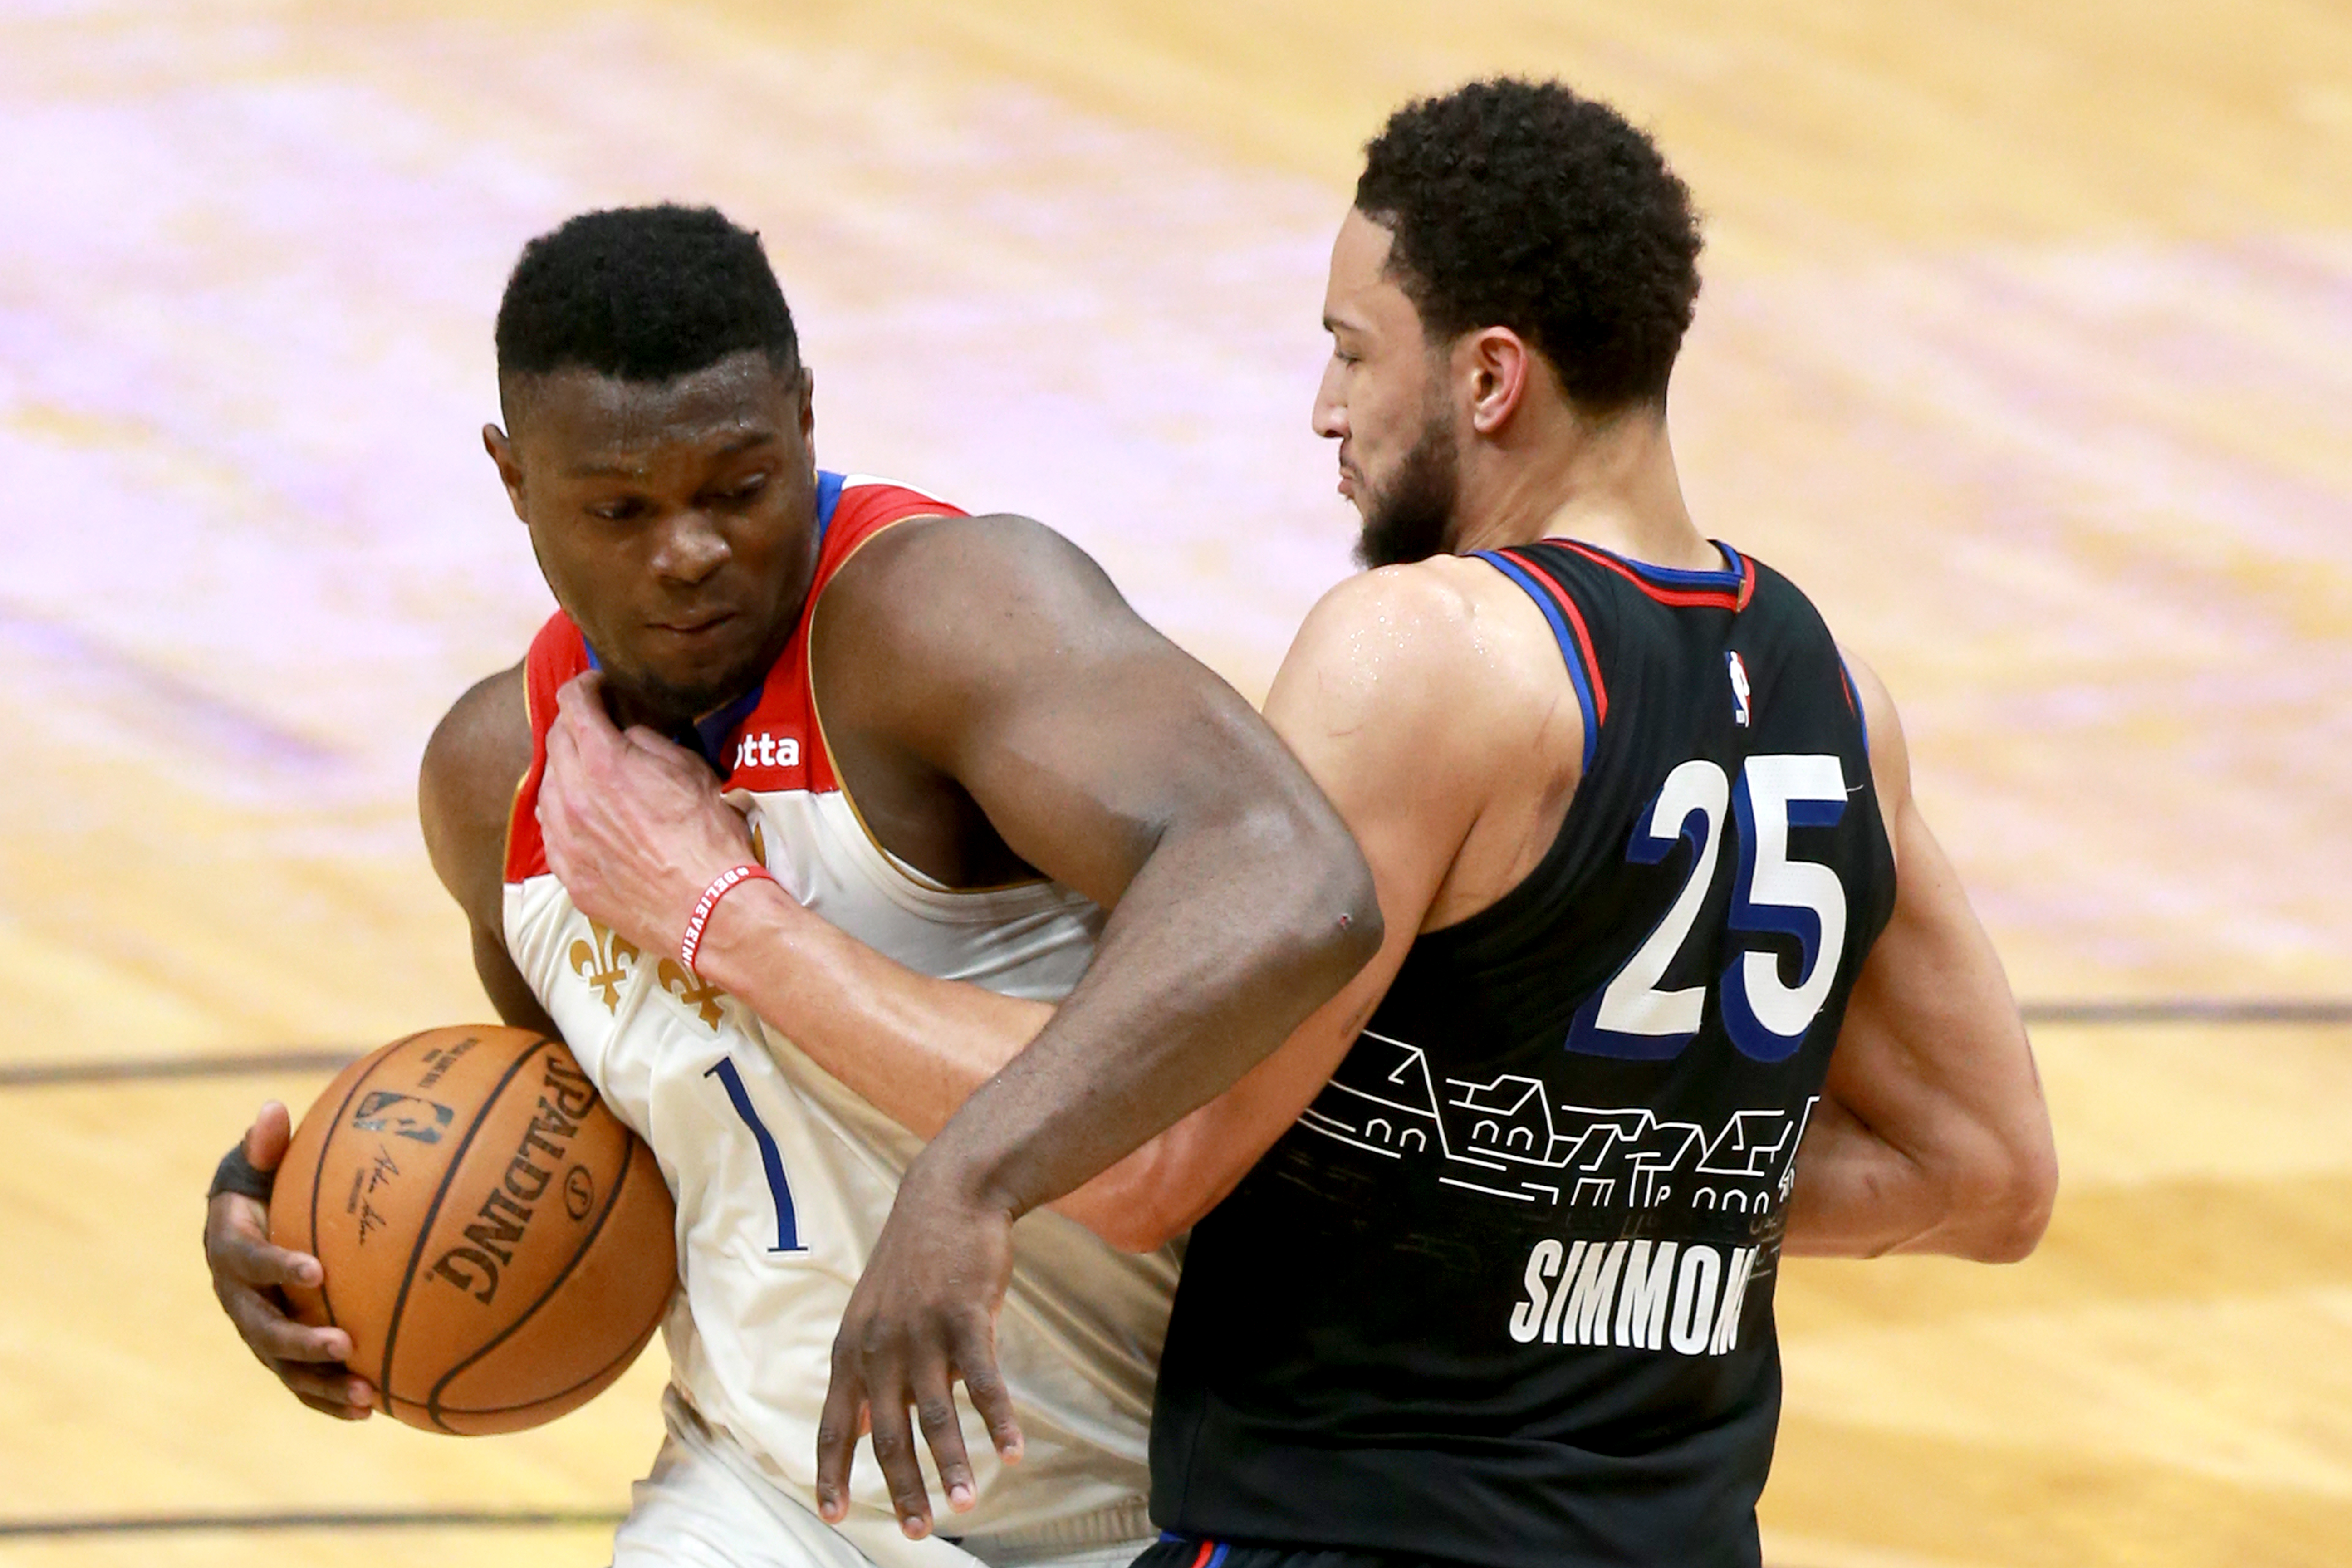 Zion Williamson Was Injured Because of ‘Egregious and Horrific’ Mistakes by the NBA According to a New Orleans Pelicans Exec